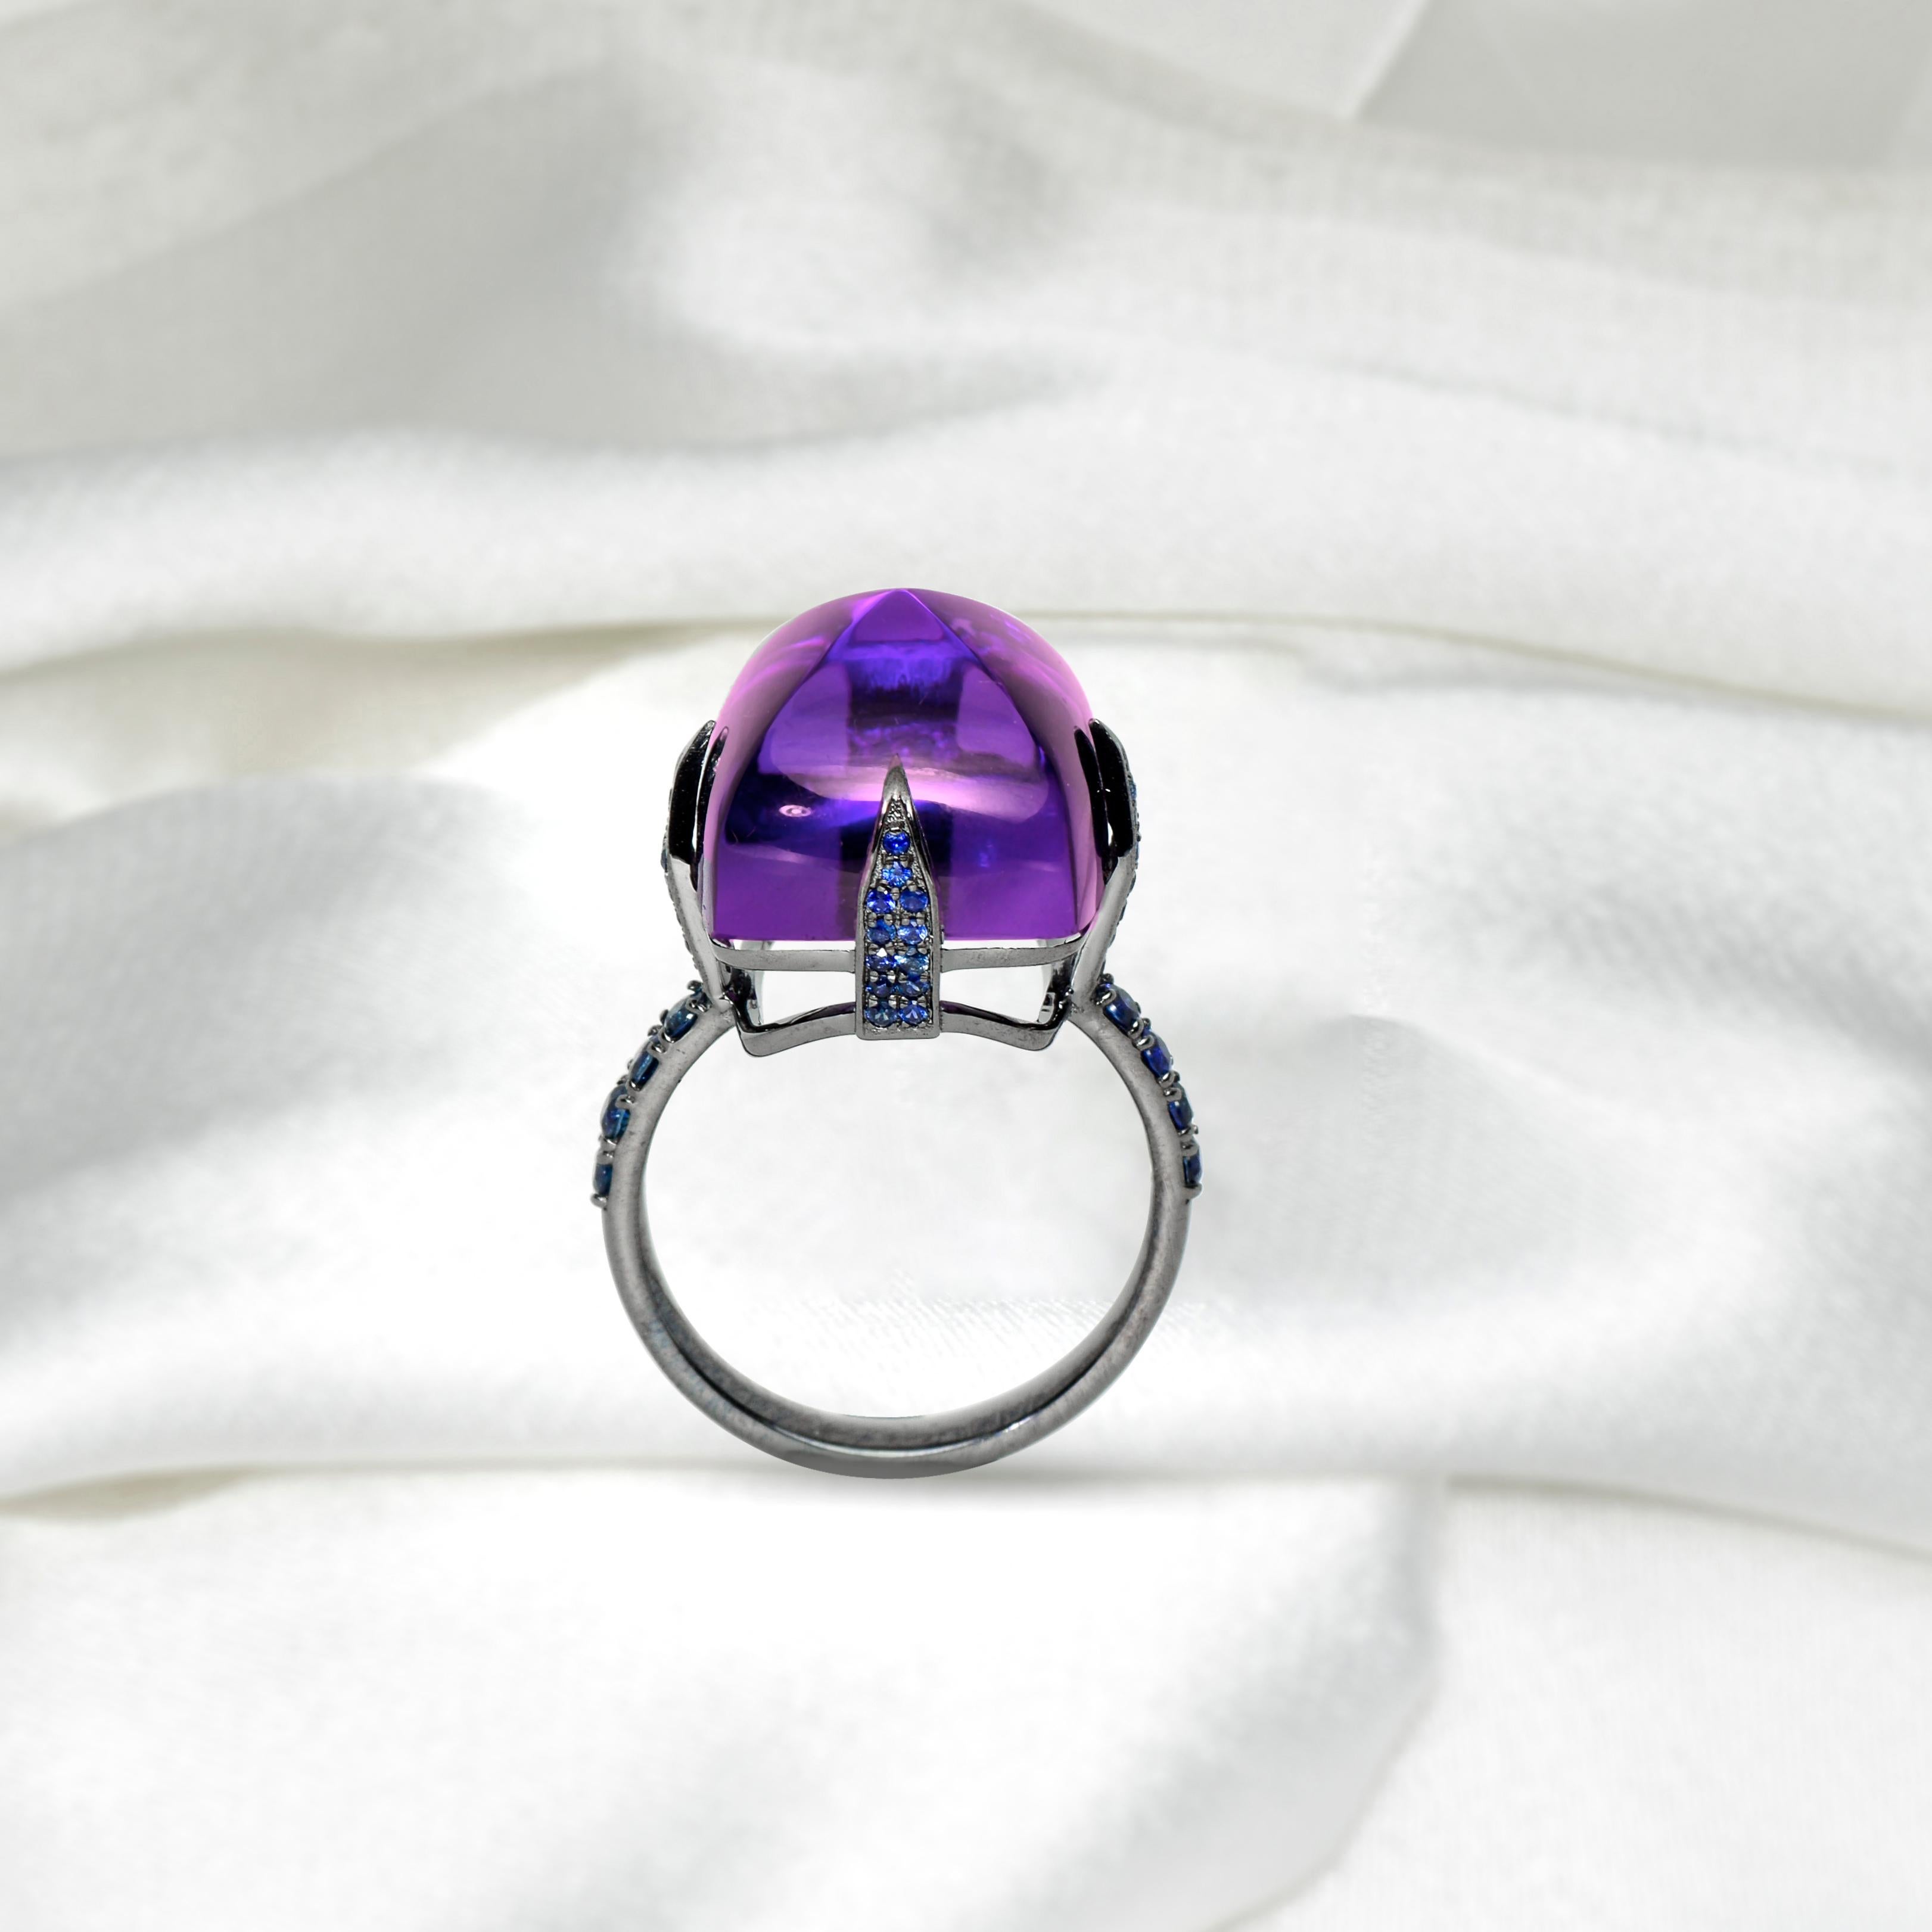 Sugarloaf Cabochon *Sale* 14k 17.46ct Amethyst & Sapphire Antique Art Deco Style Engagement Ring